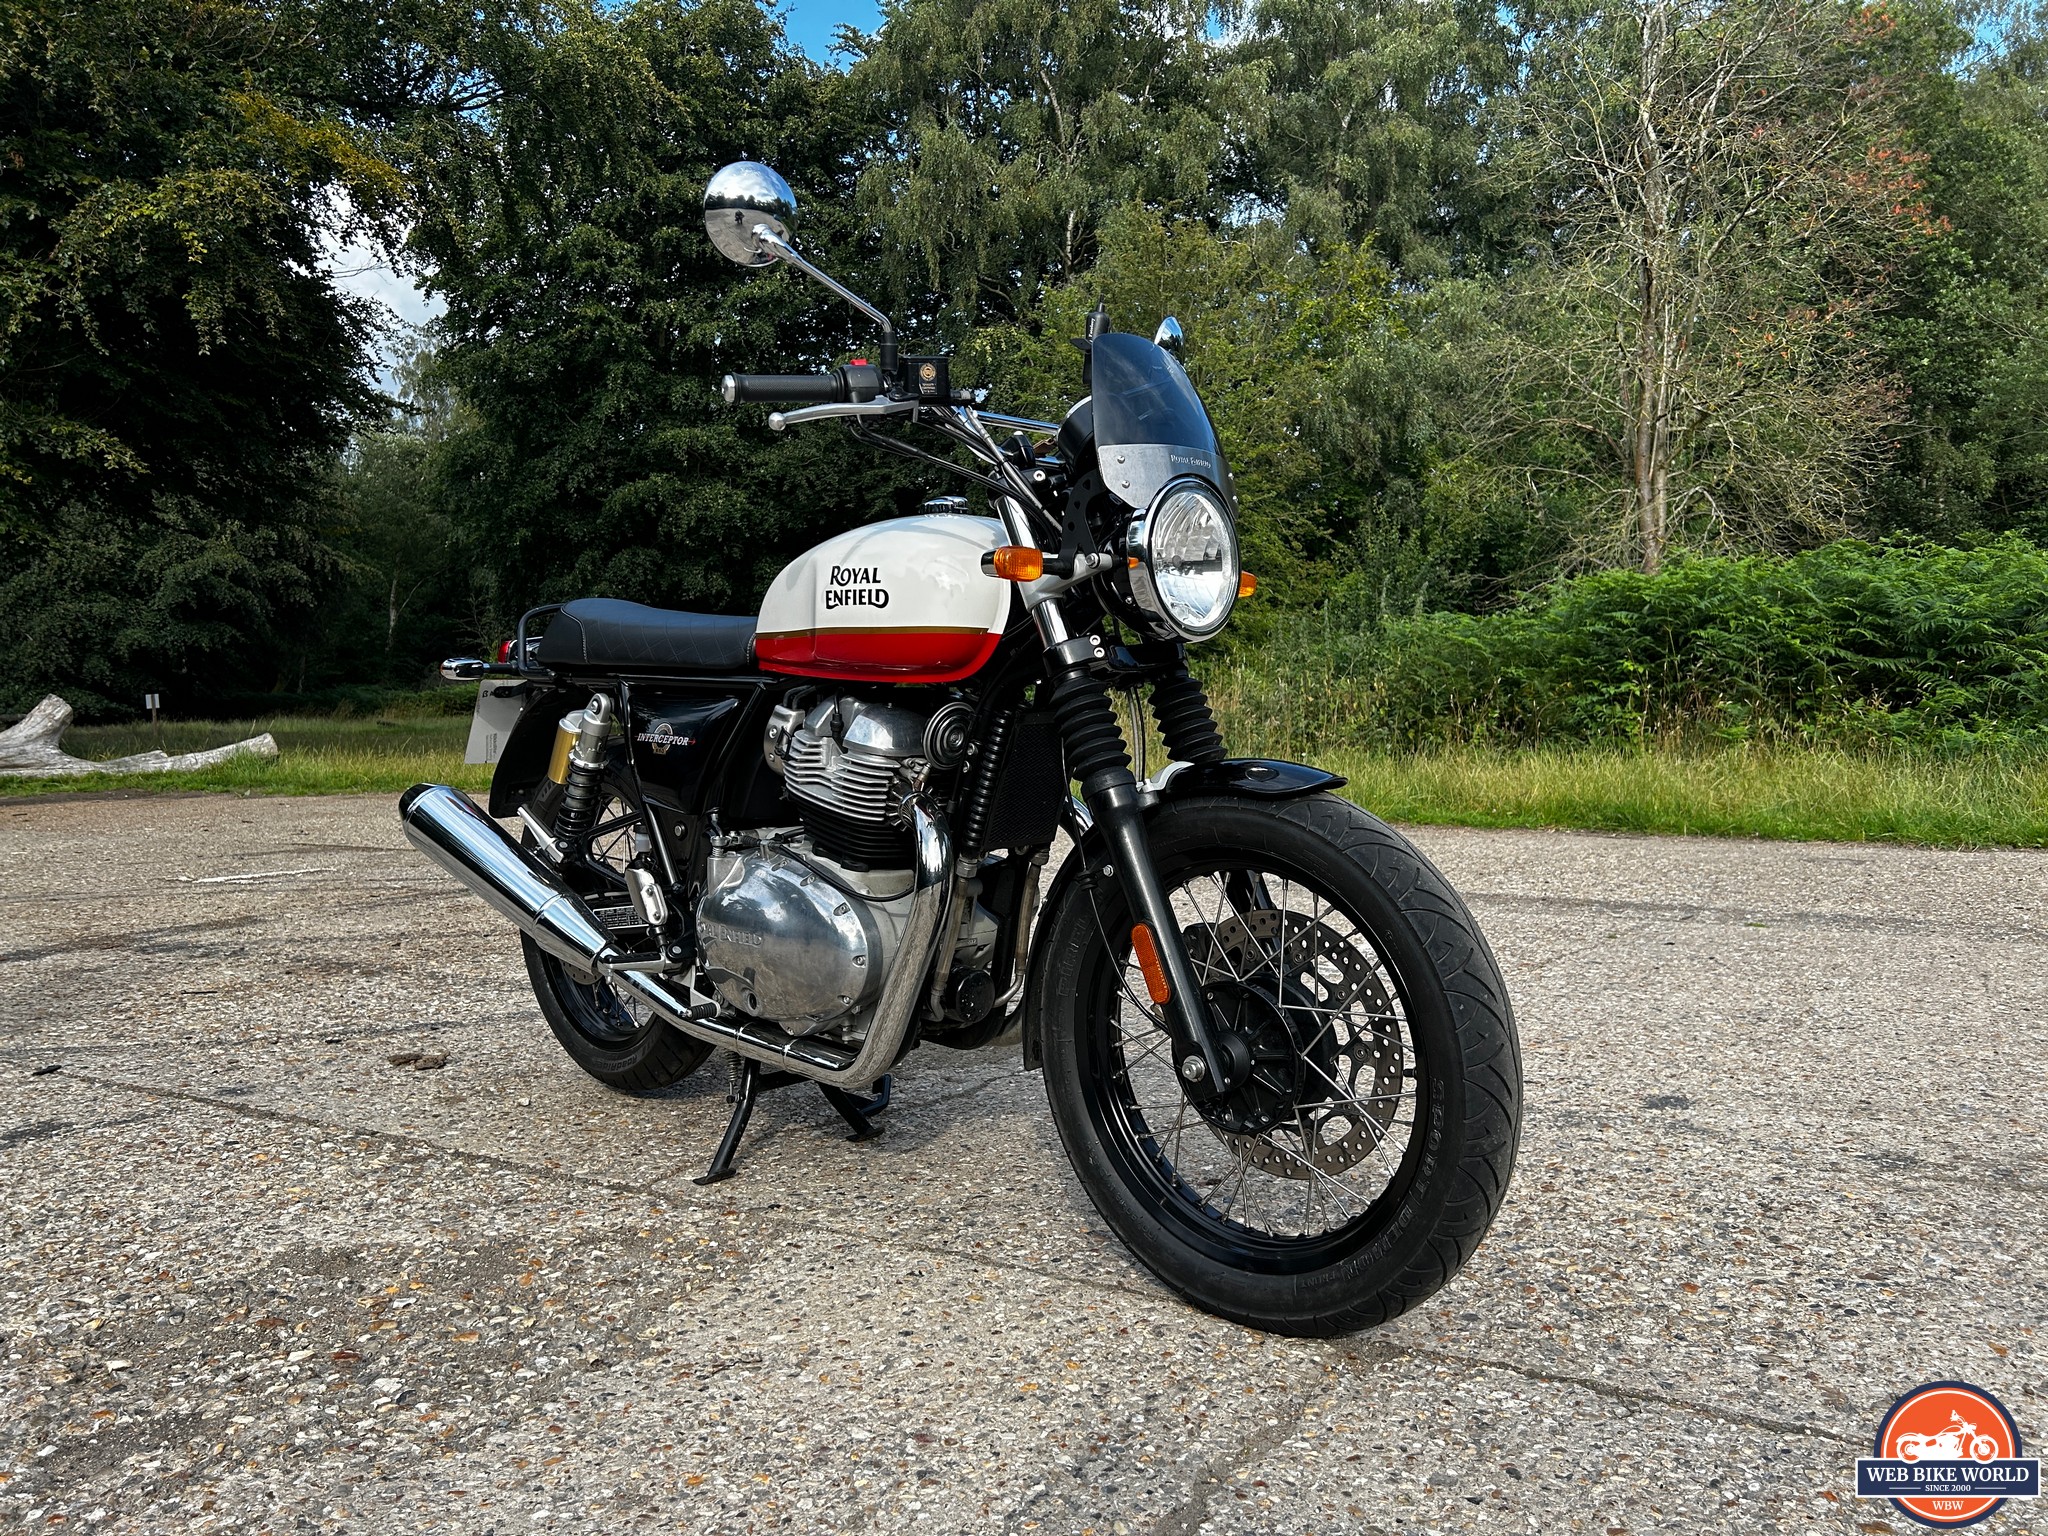 Front angled view of the Royal Enfield Interceptor 650